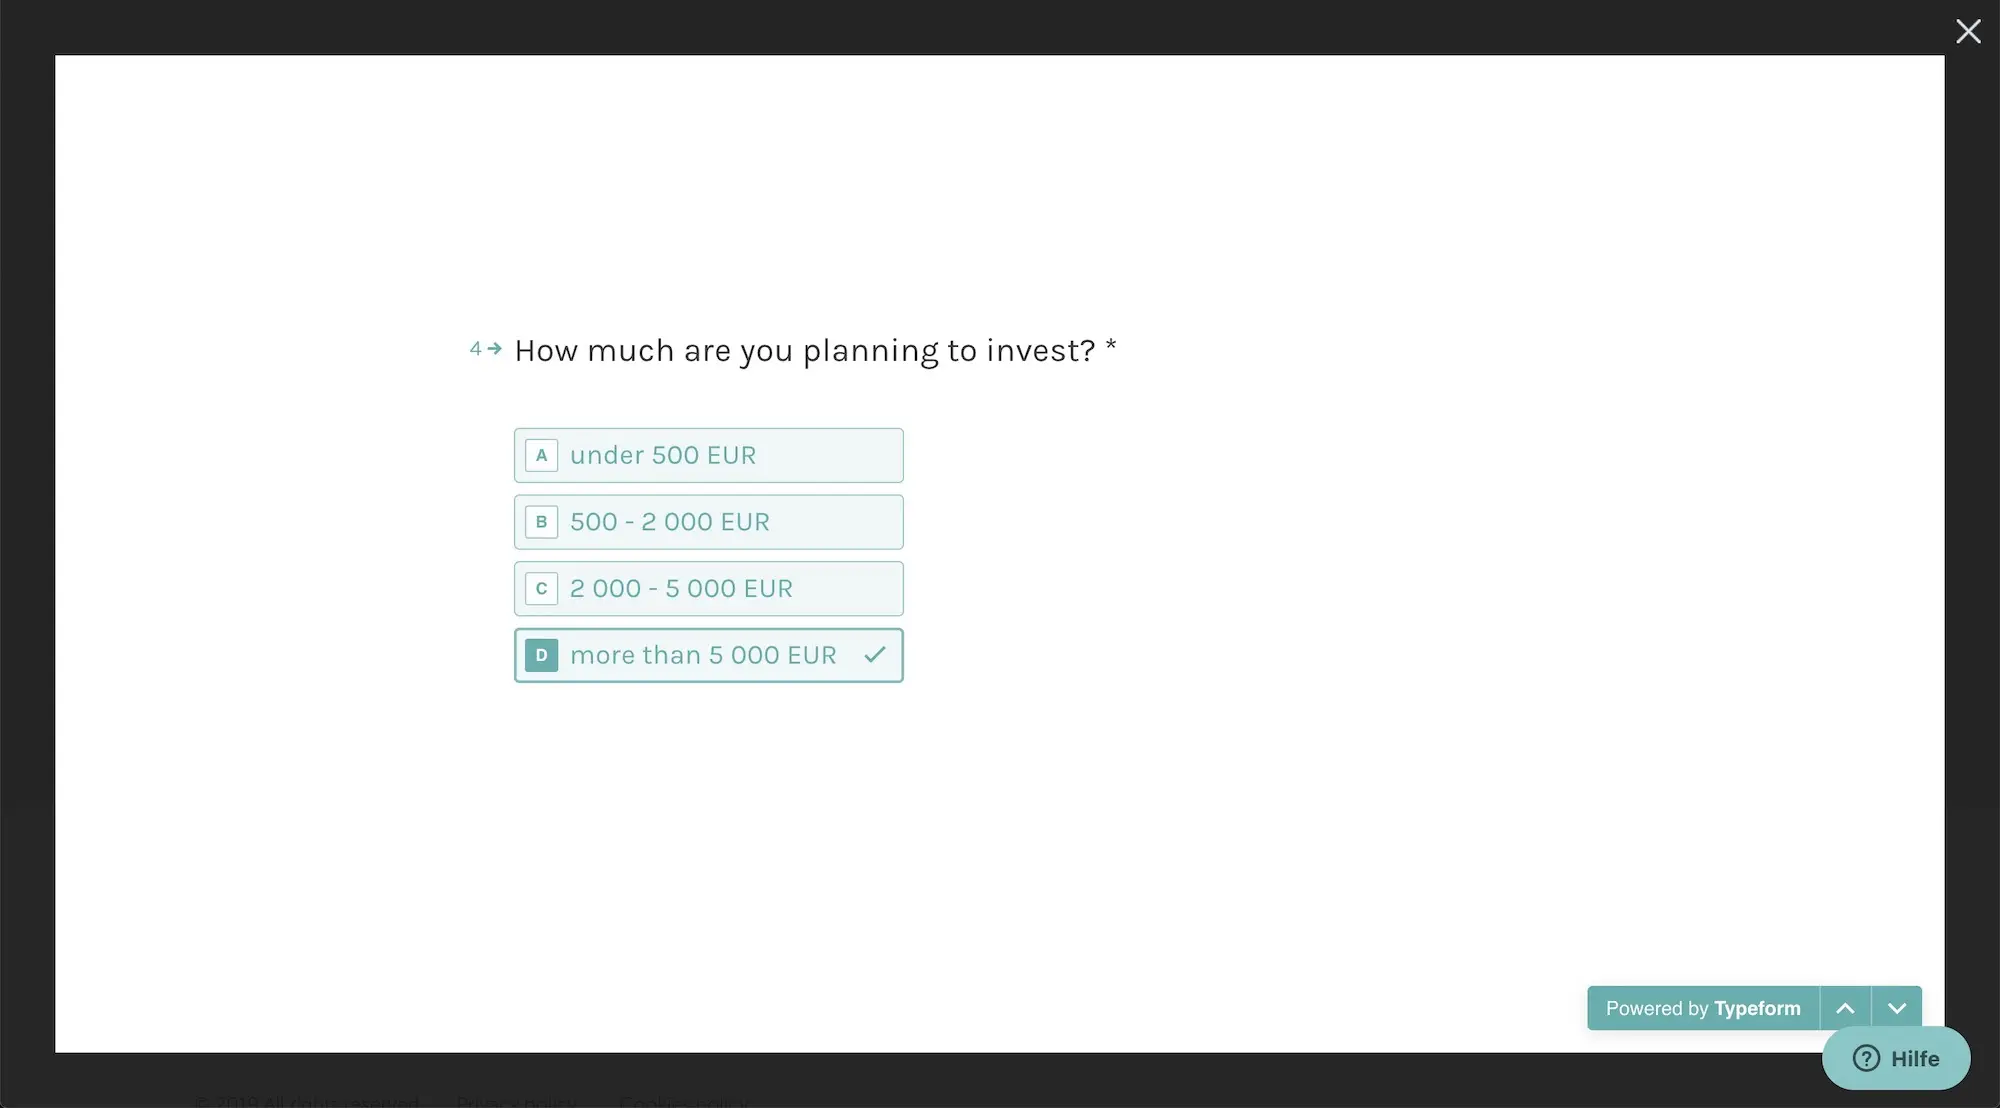 And the last question: how much do you plan to invest via Mintos?